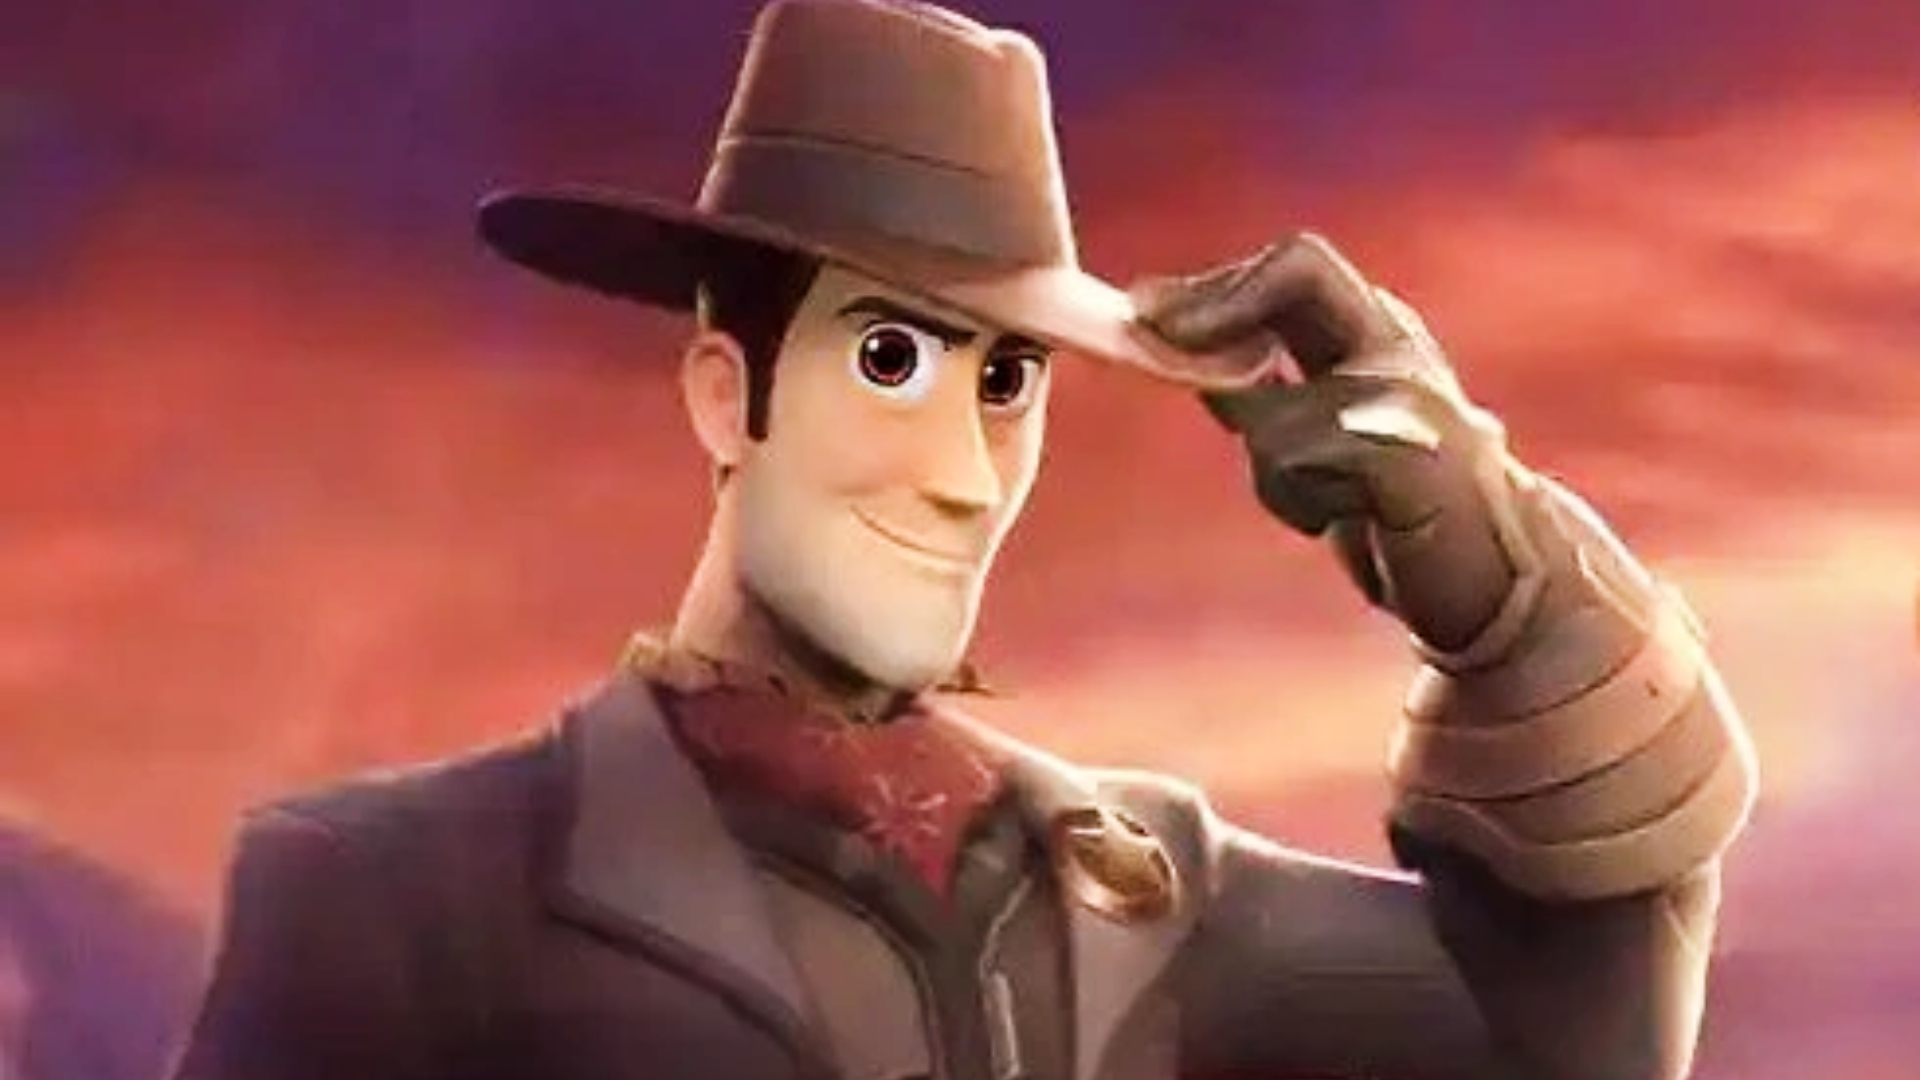 Disney Animation Promos on X: Woody from the 'TOY STORY' franchise in  Disney's 'MIRRORVERSE.' 👀  / X